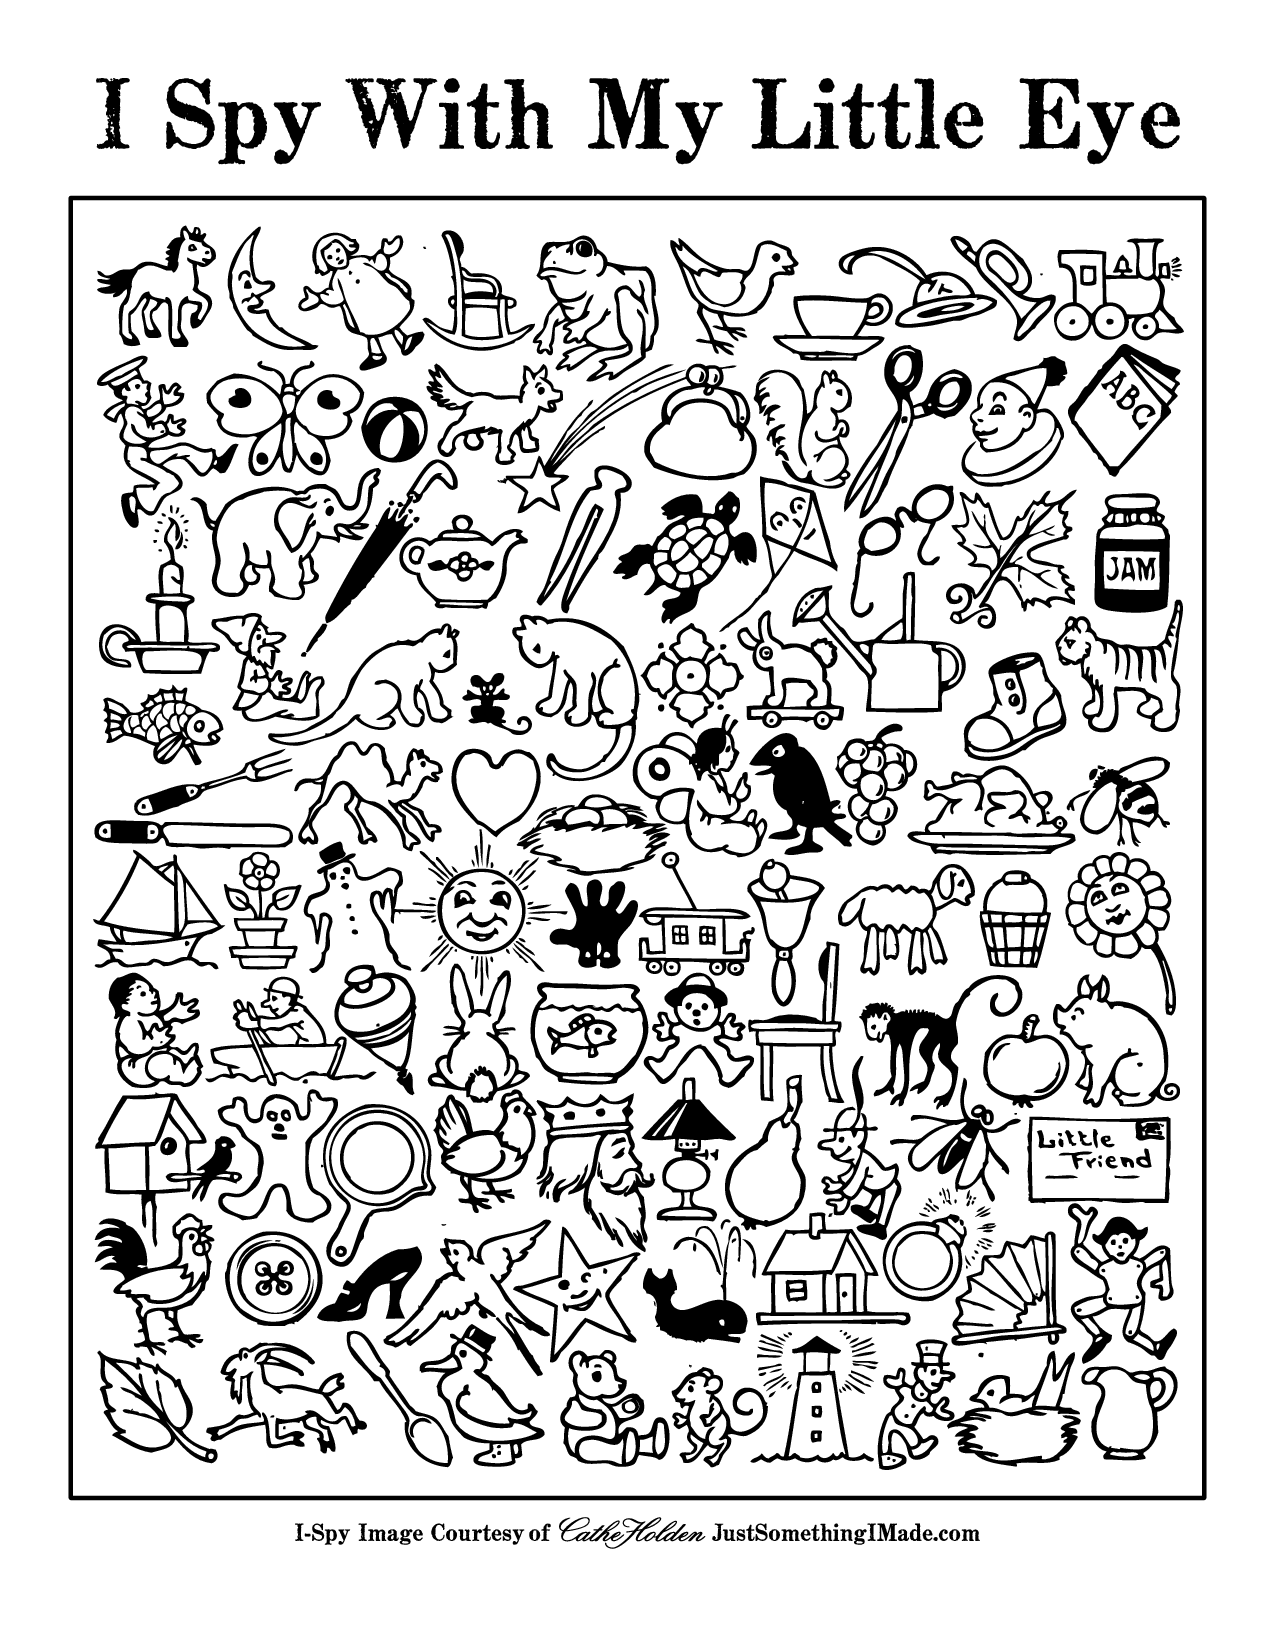 I Spy Coloring Pages for Kids